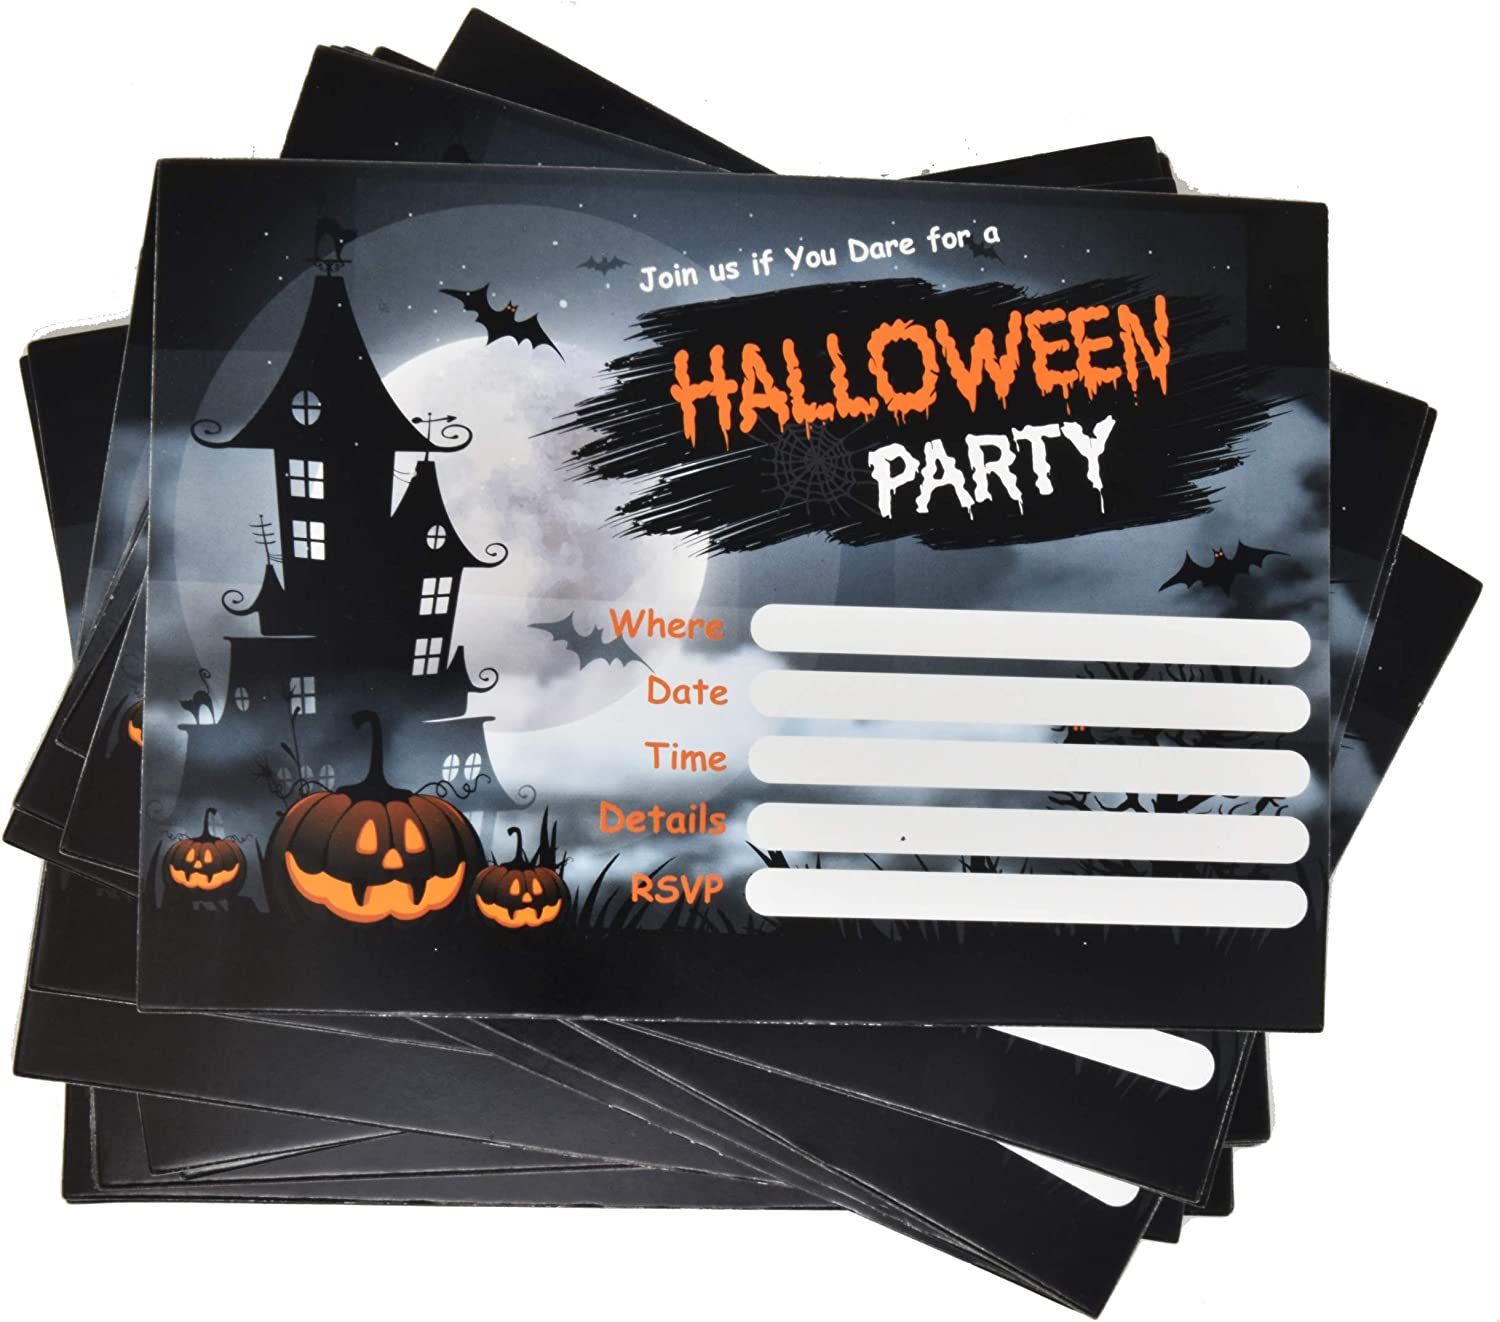 Create an Animated Invitation for your Halloween Party in No Time